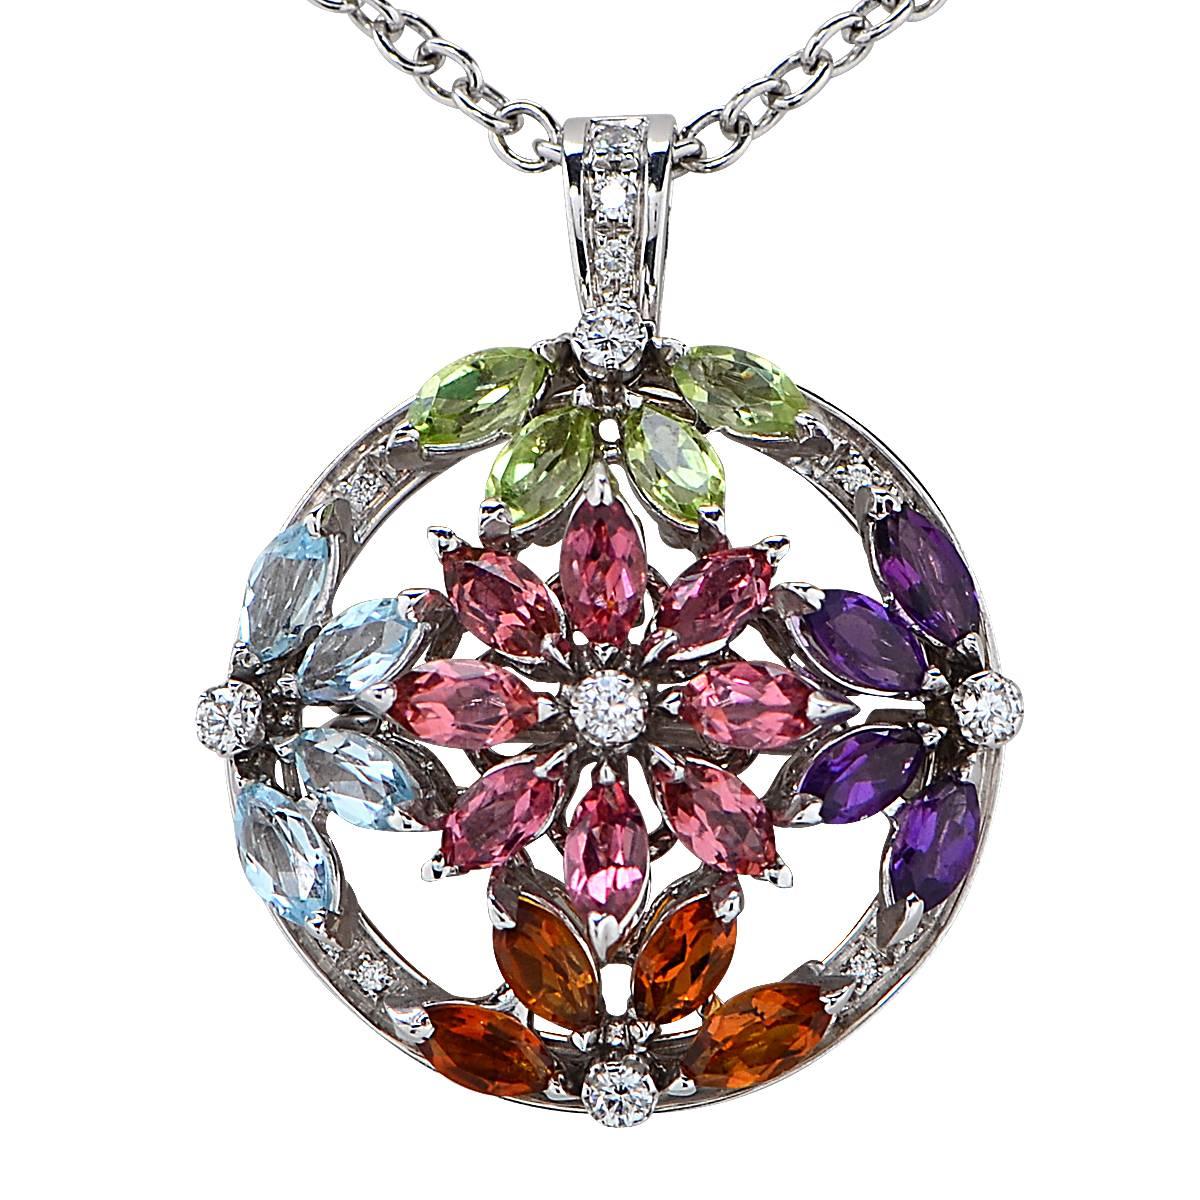 Asprey 18 Karat White Gold Necklace Featuring 24 Marquise Cut Citrine, Peridot, Blue Topaz, Amethyst and Pink Tourmaline Weighing 1.20cts Total Accented by 20 Round Brilliant Cut Diamonds Weighing .20cts Total.